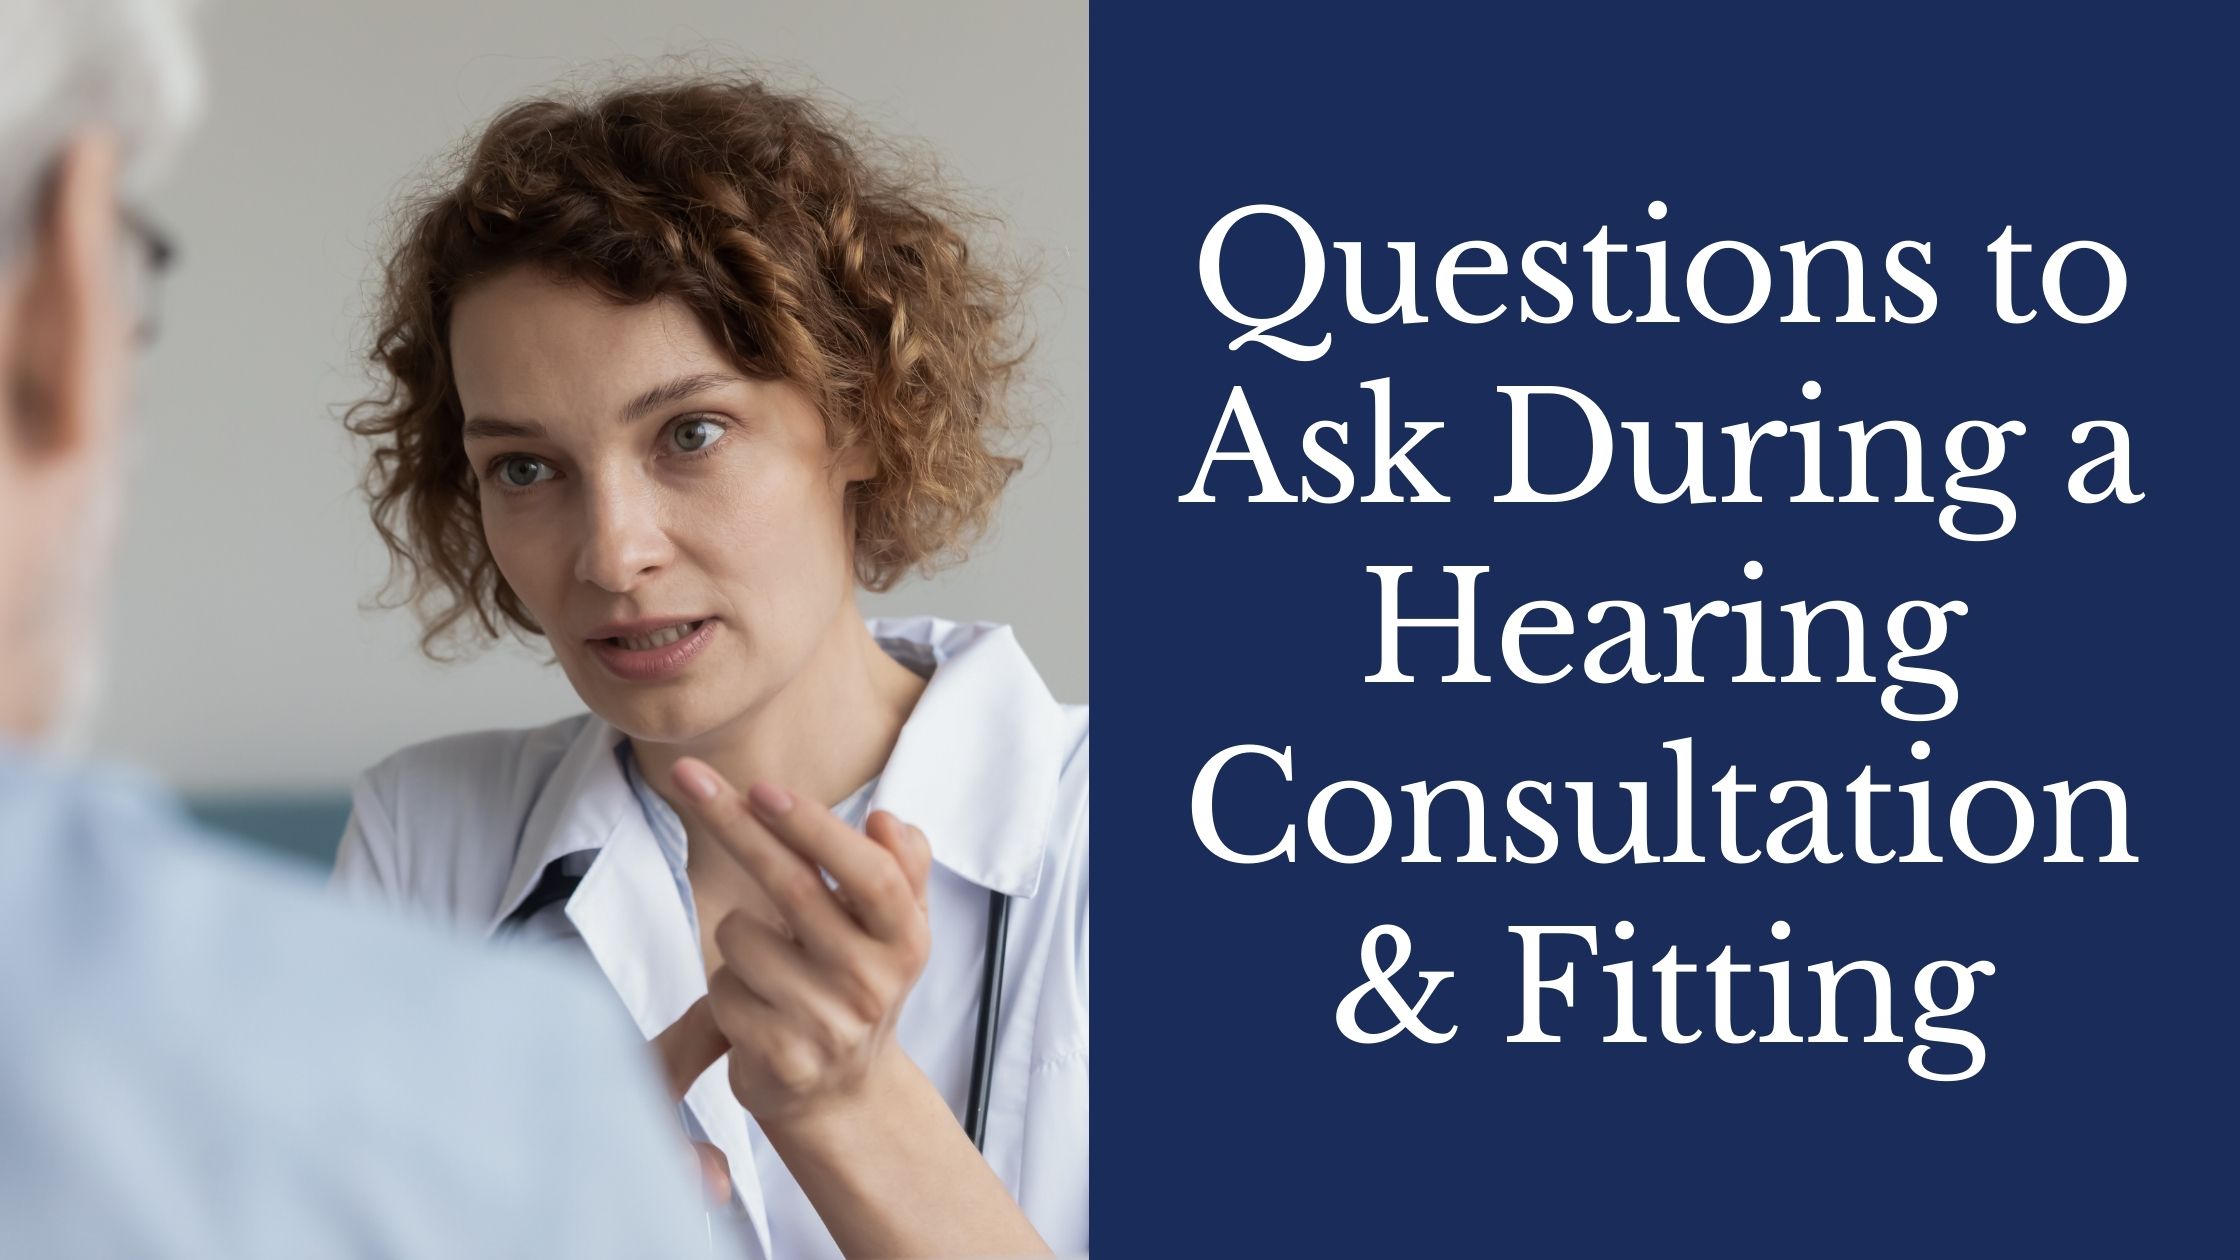 Questions to Ask During a Hearing Consultation & Fitting